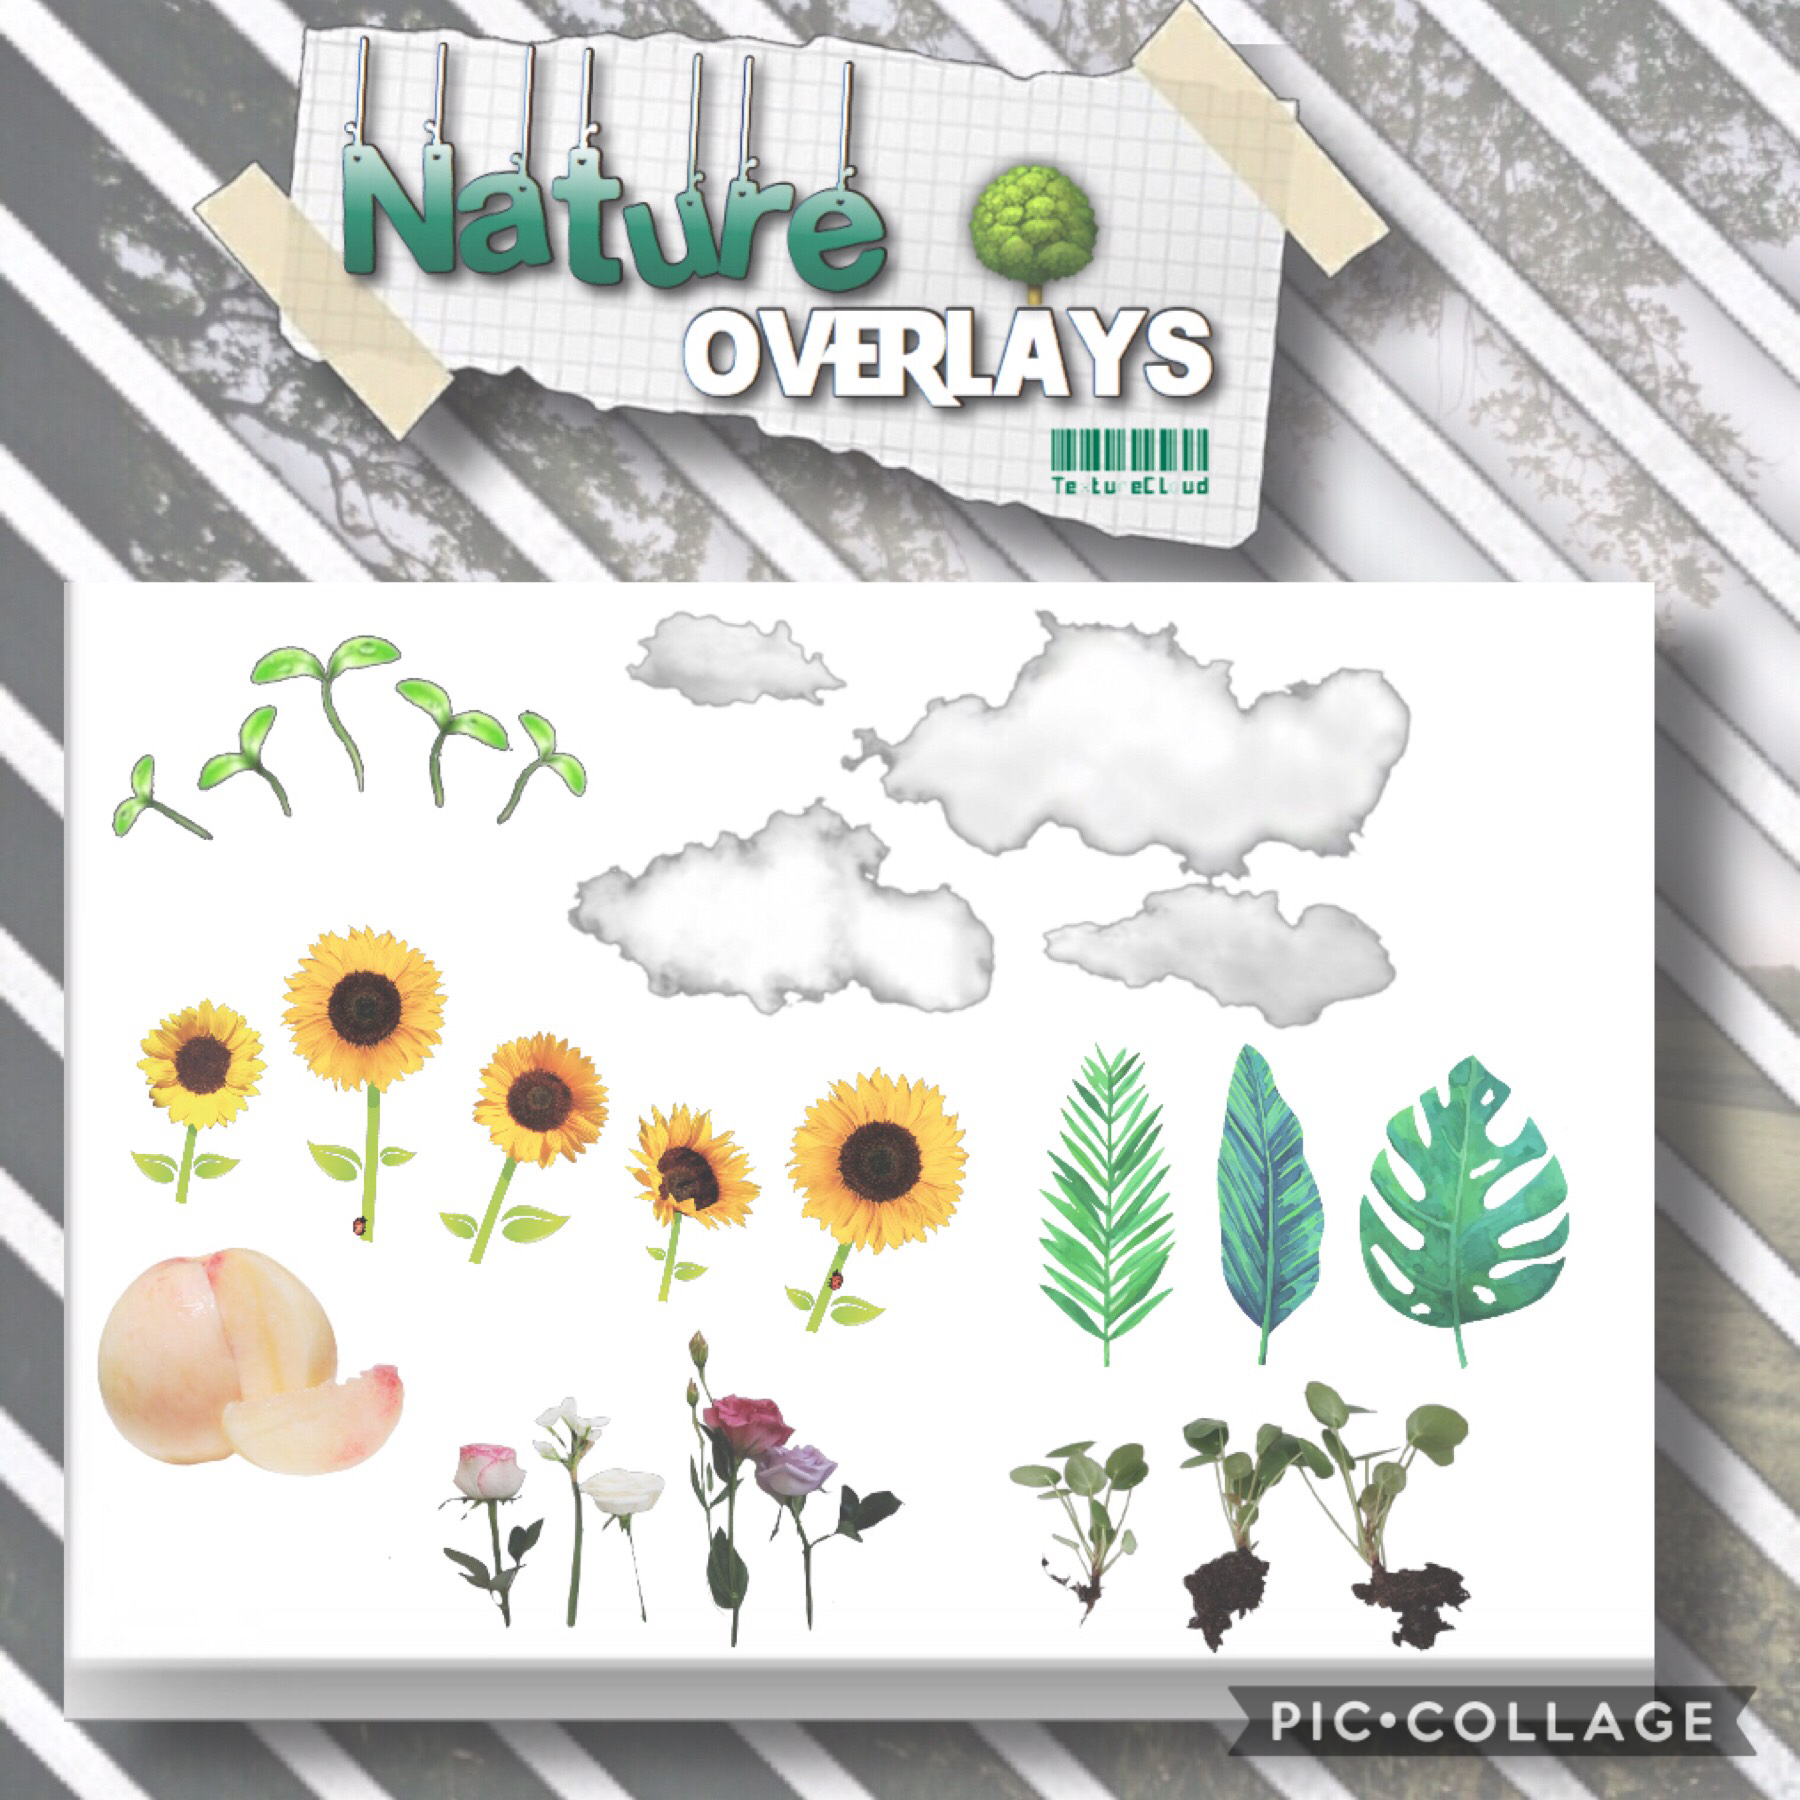 🌿Nature Overlays🌿

I love themed stickers and overlays, but it took me a while to be confident using them (e.g. cropping, erasing background etc.) would anyone like a tutorial on how to edit and use packs like this? Let me know in the comments!🌿